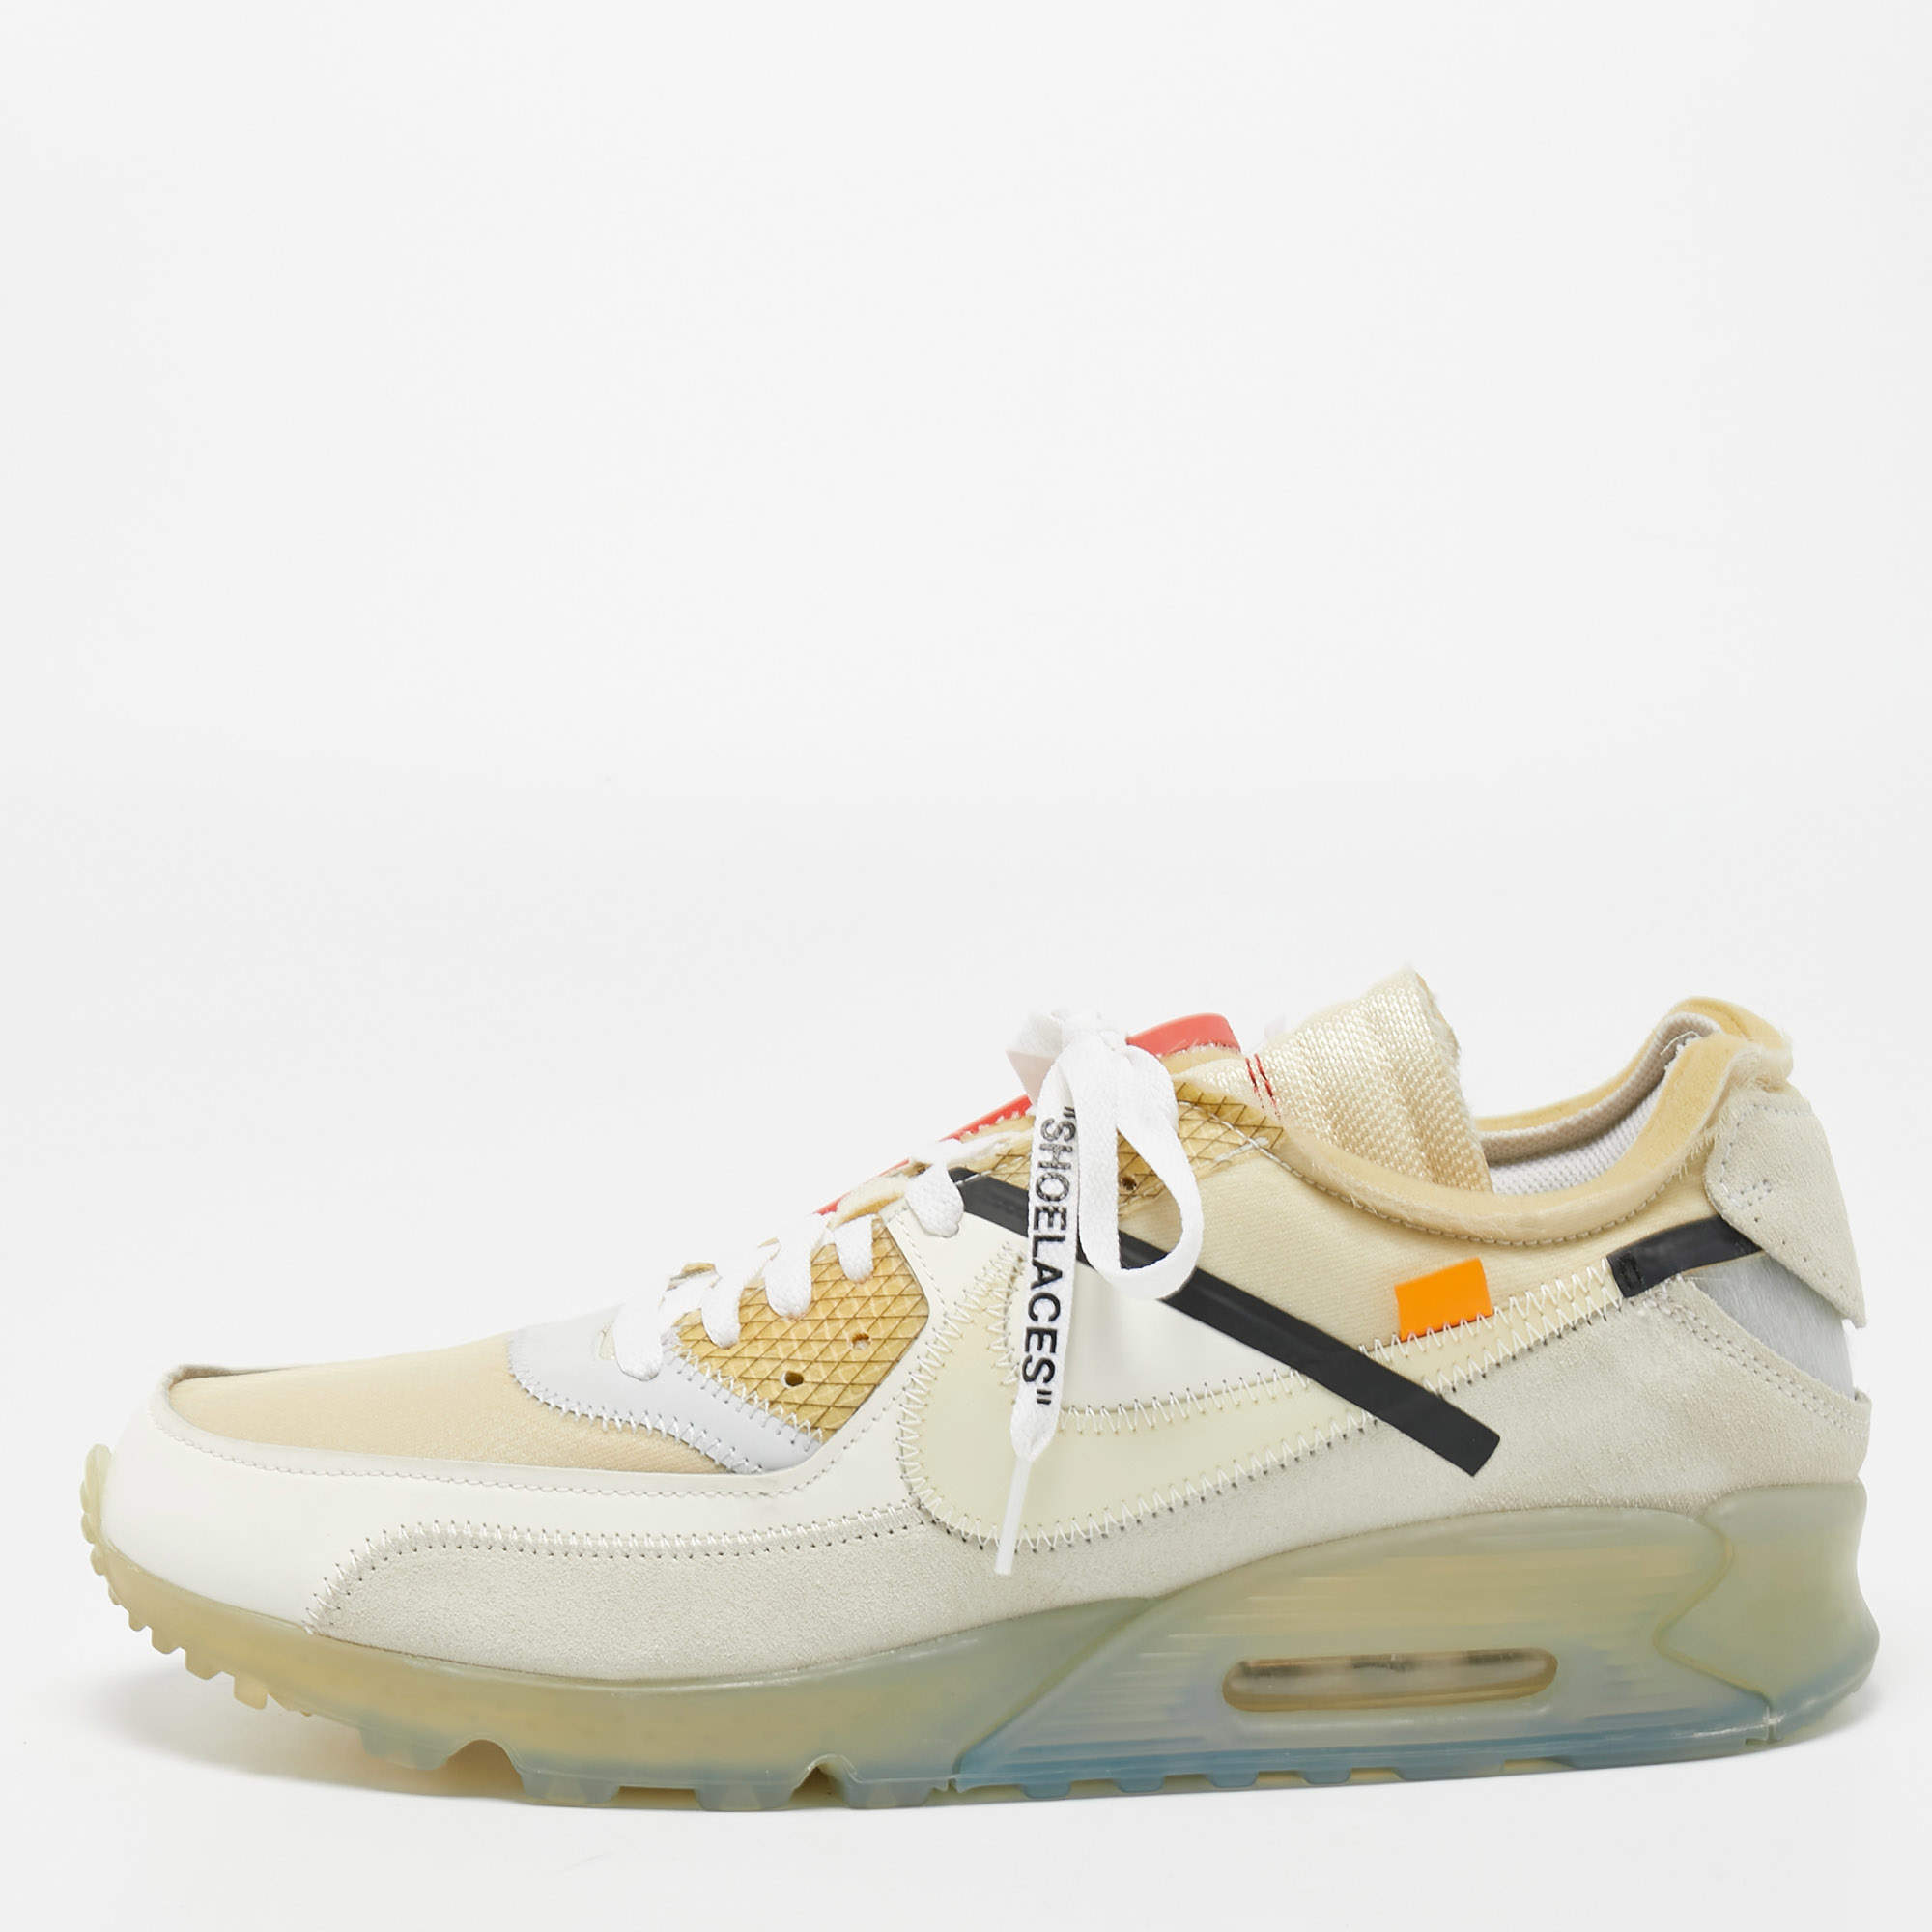 Off-White Nike Tricolor Leather and Mesh The 10 Air Max 90 Sneakers Size 47.5 Off-White x Nike | TLC